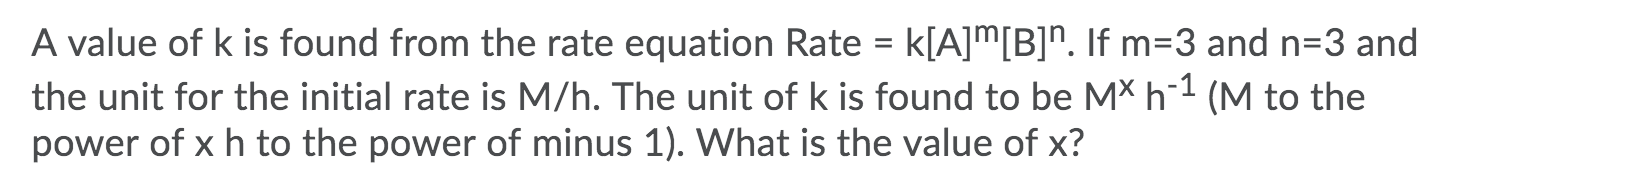 A value of k is found from the rate equation Rate = k[A]m[B]". If m=3 and n=3 and
the unit for the initial rate is M/h. The unit of k is found to be MX h¯1 (M to the
power of x h to the power of minus 1). What is the value of x?
